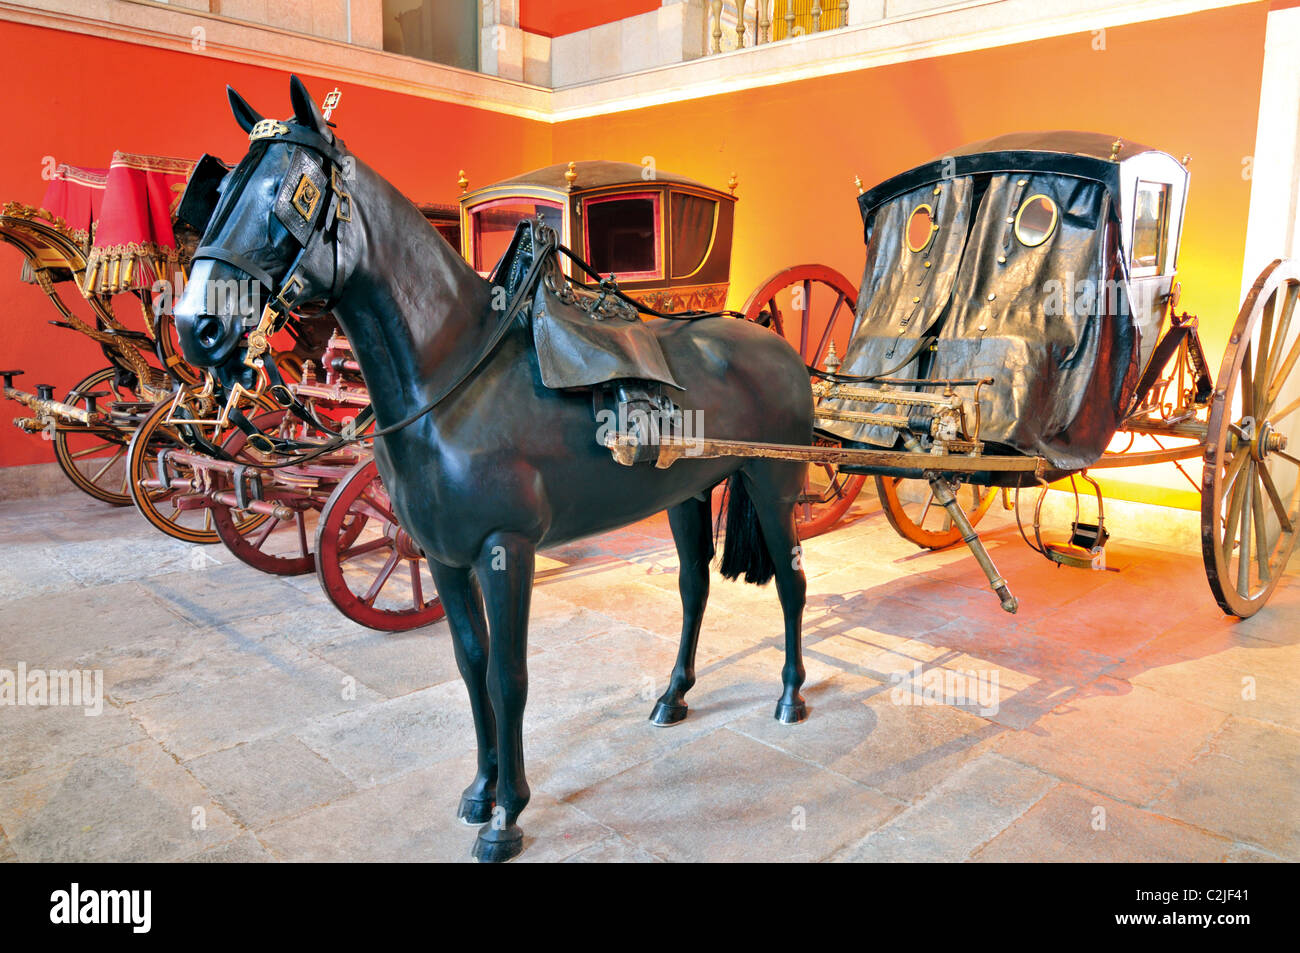 Portugal, Lisbon: 'Sége dos Oculos' - Carriage of the glasses, horse carriage of the 18th century in the Museu dos Coches Stock Photo